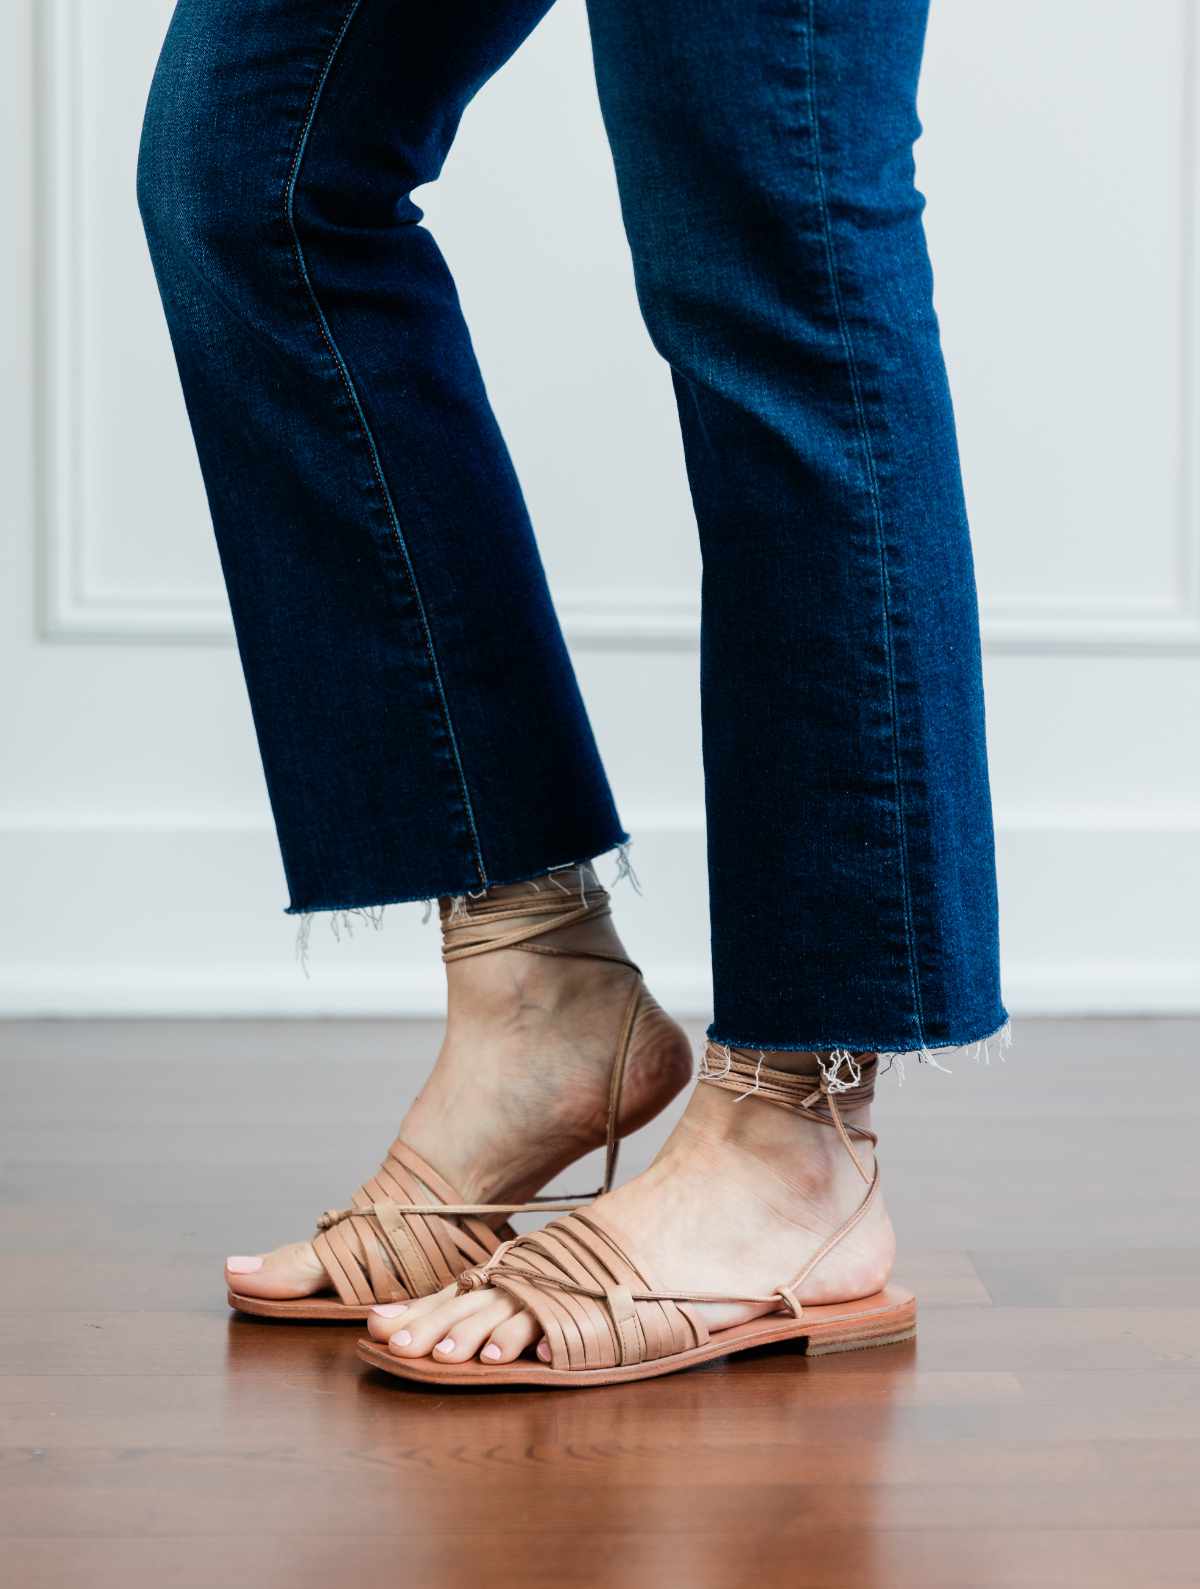 Cropped view of woman's legs wearing beige strappy green style sandals with kick flares.